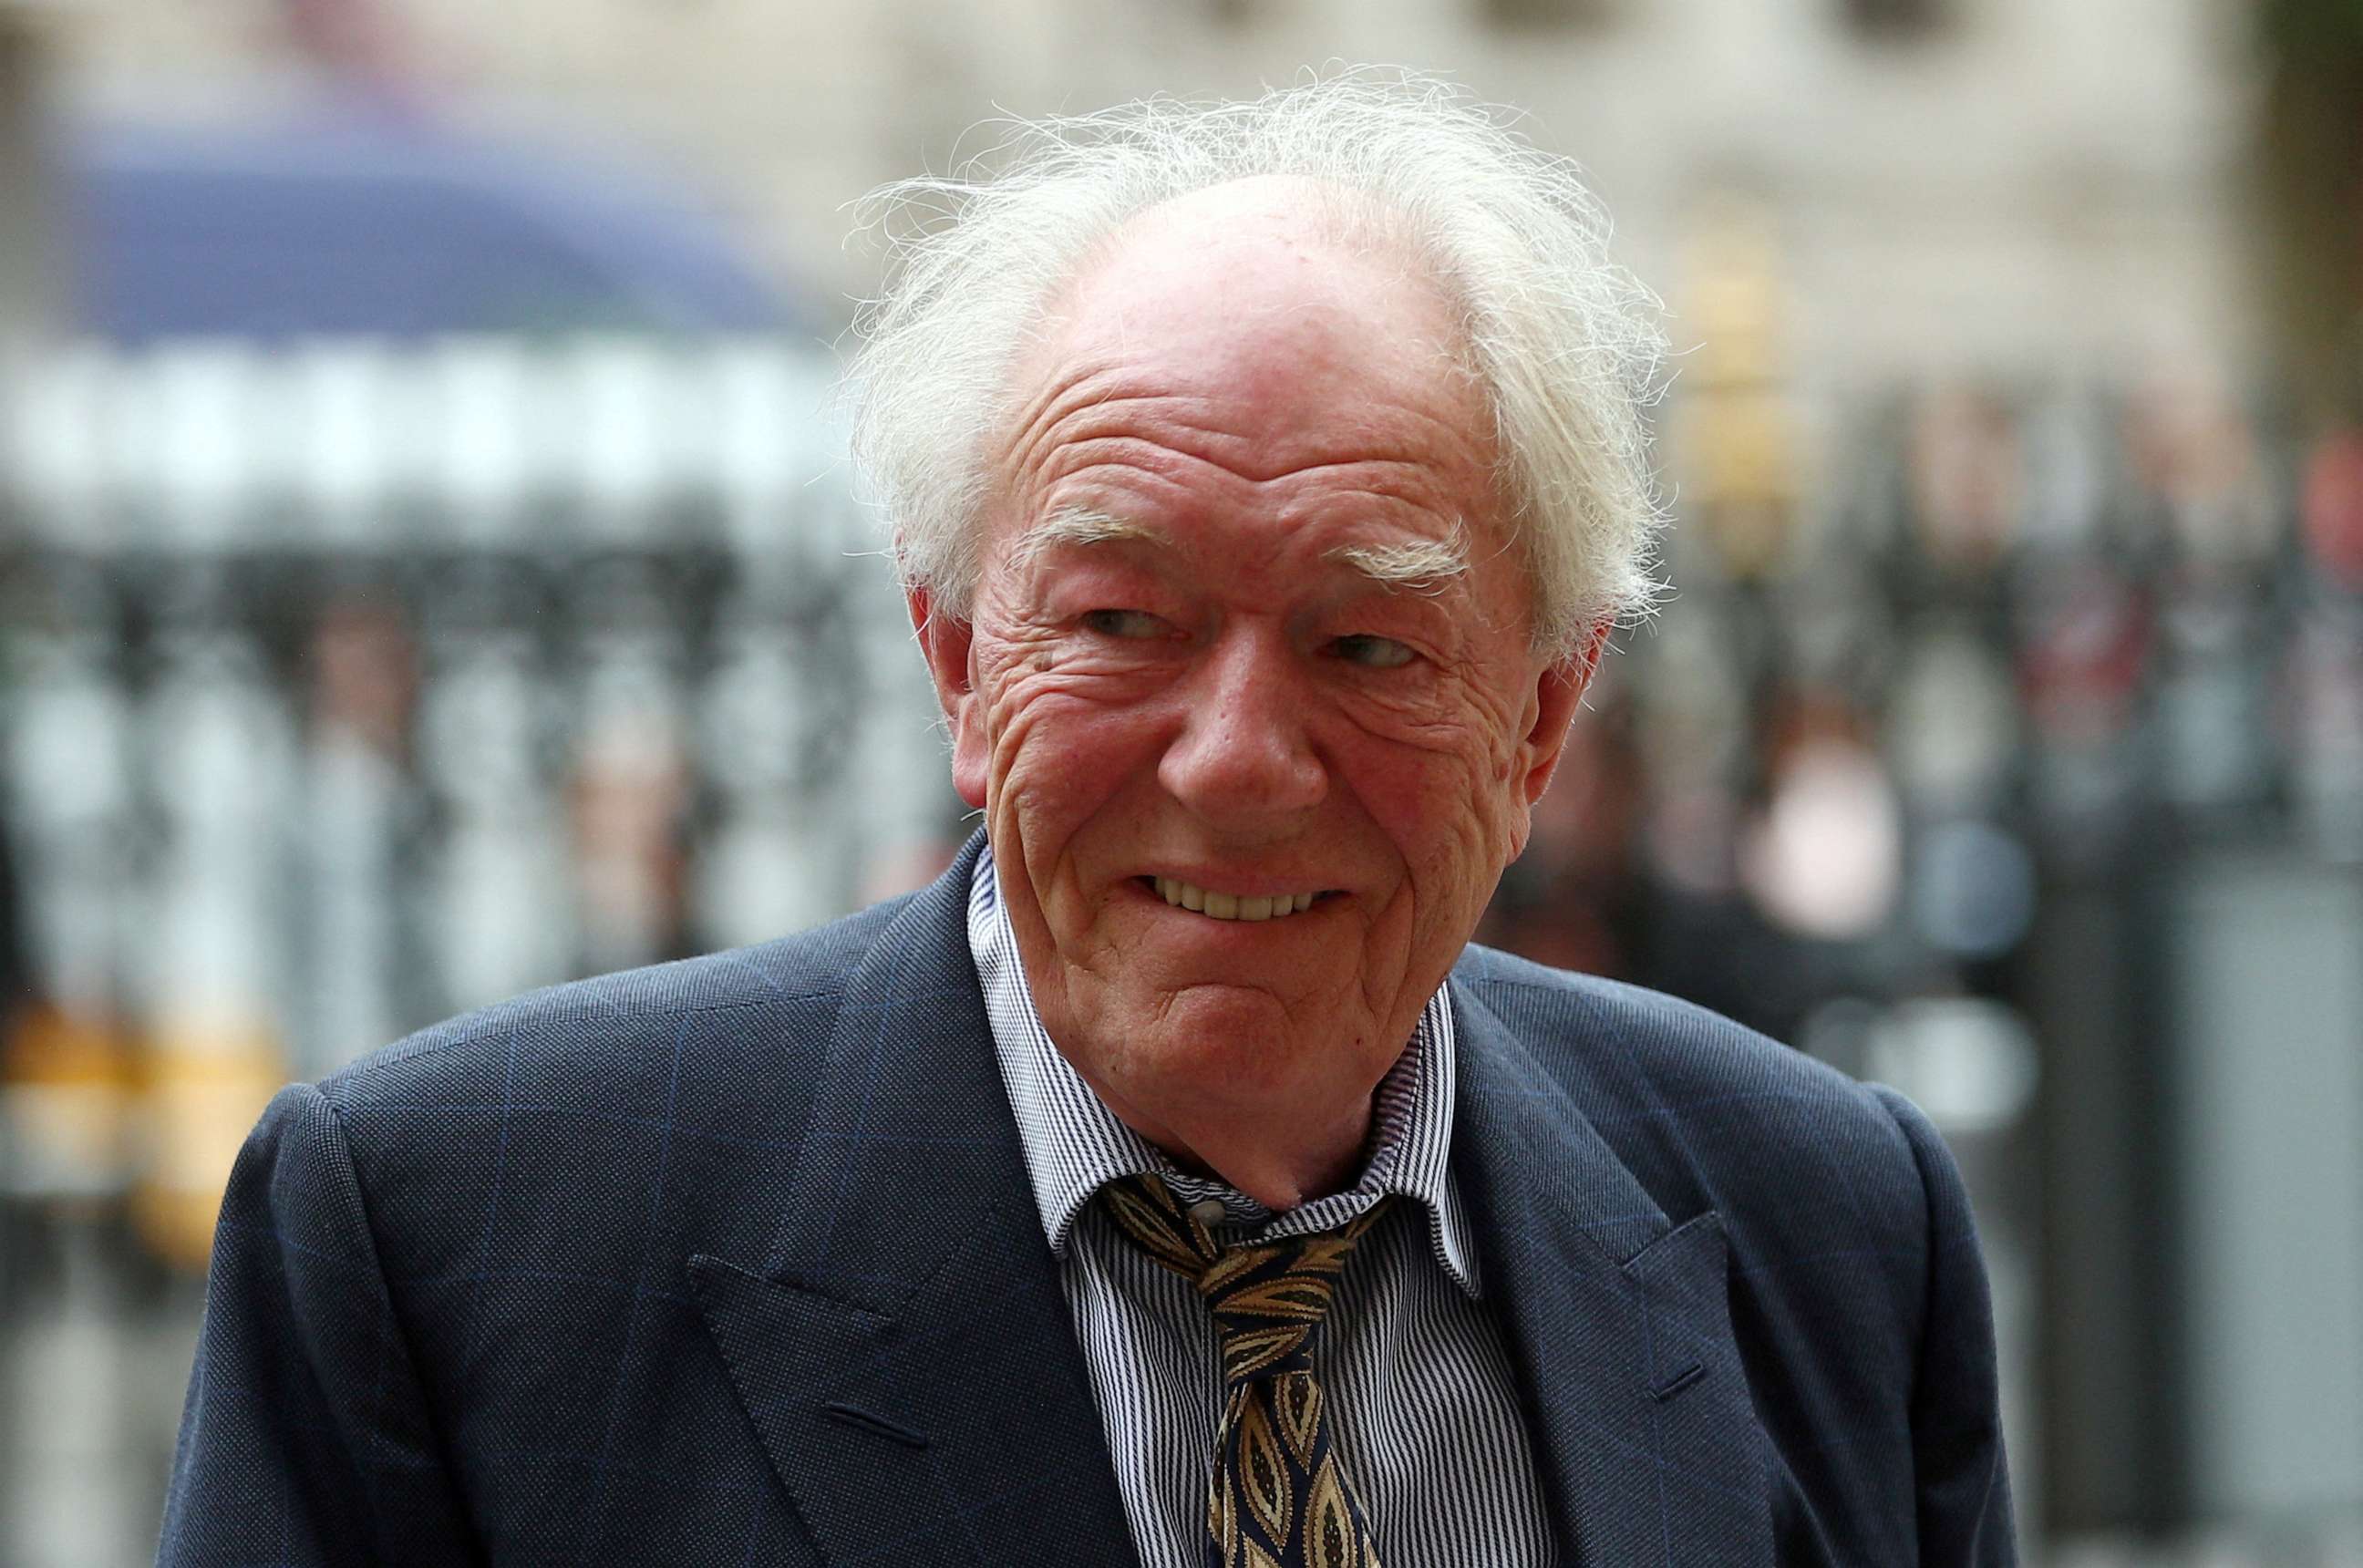 FILE PHOTO: Actor Michael Gambon attends a Service of Thanksgiving for Sir Peter Hall at Westminster Abbey in London, Britain, September 11, 2018.